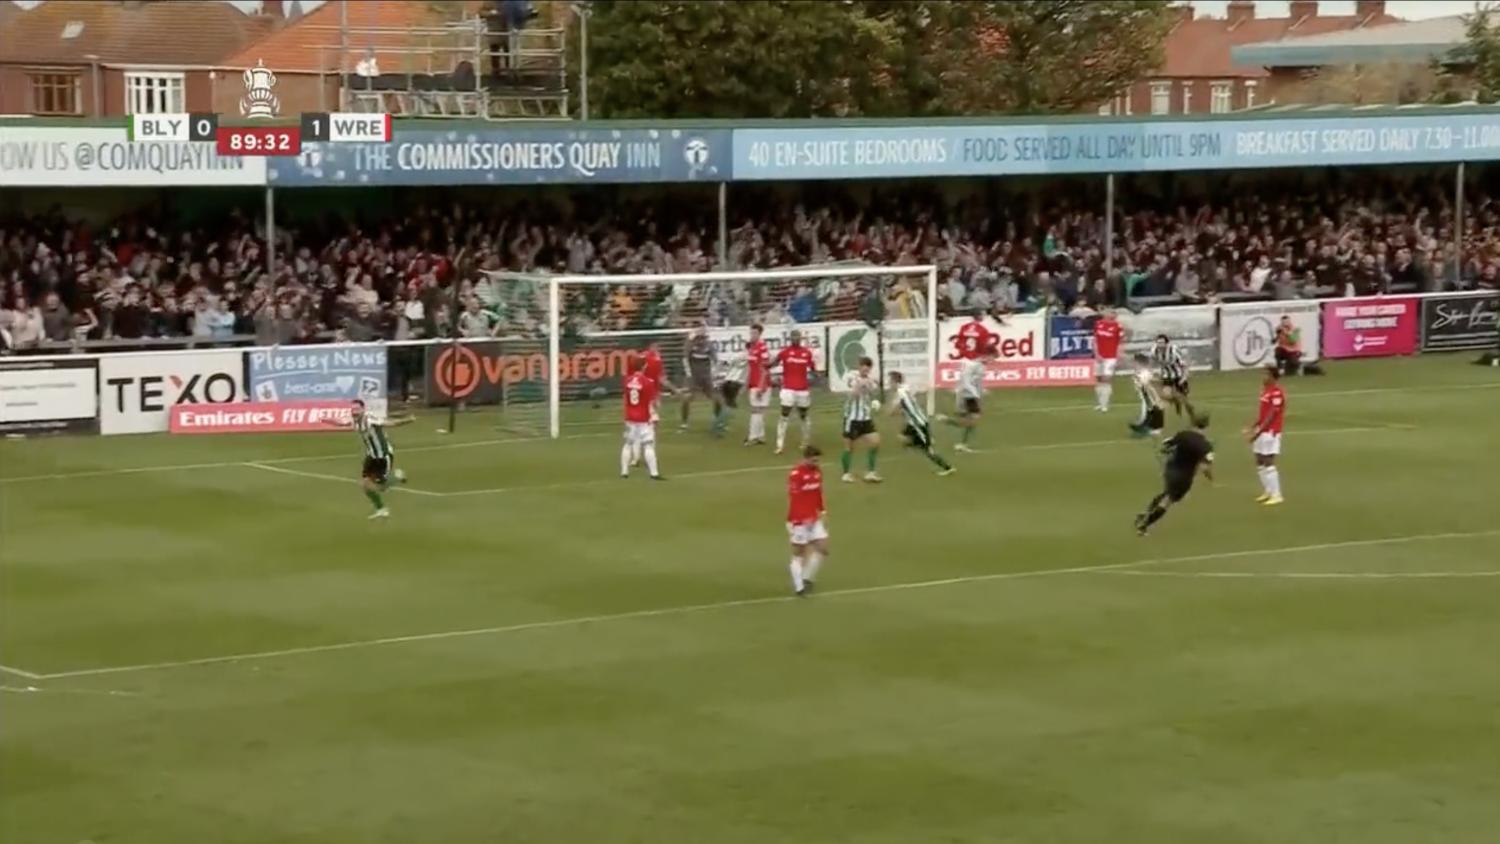 Blyth Spartans force FA Cup replay against Wrexham on ESPN